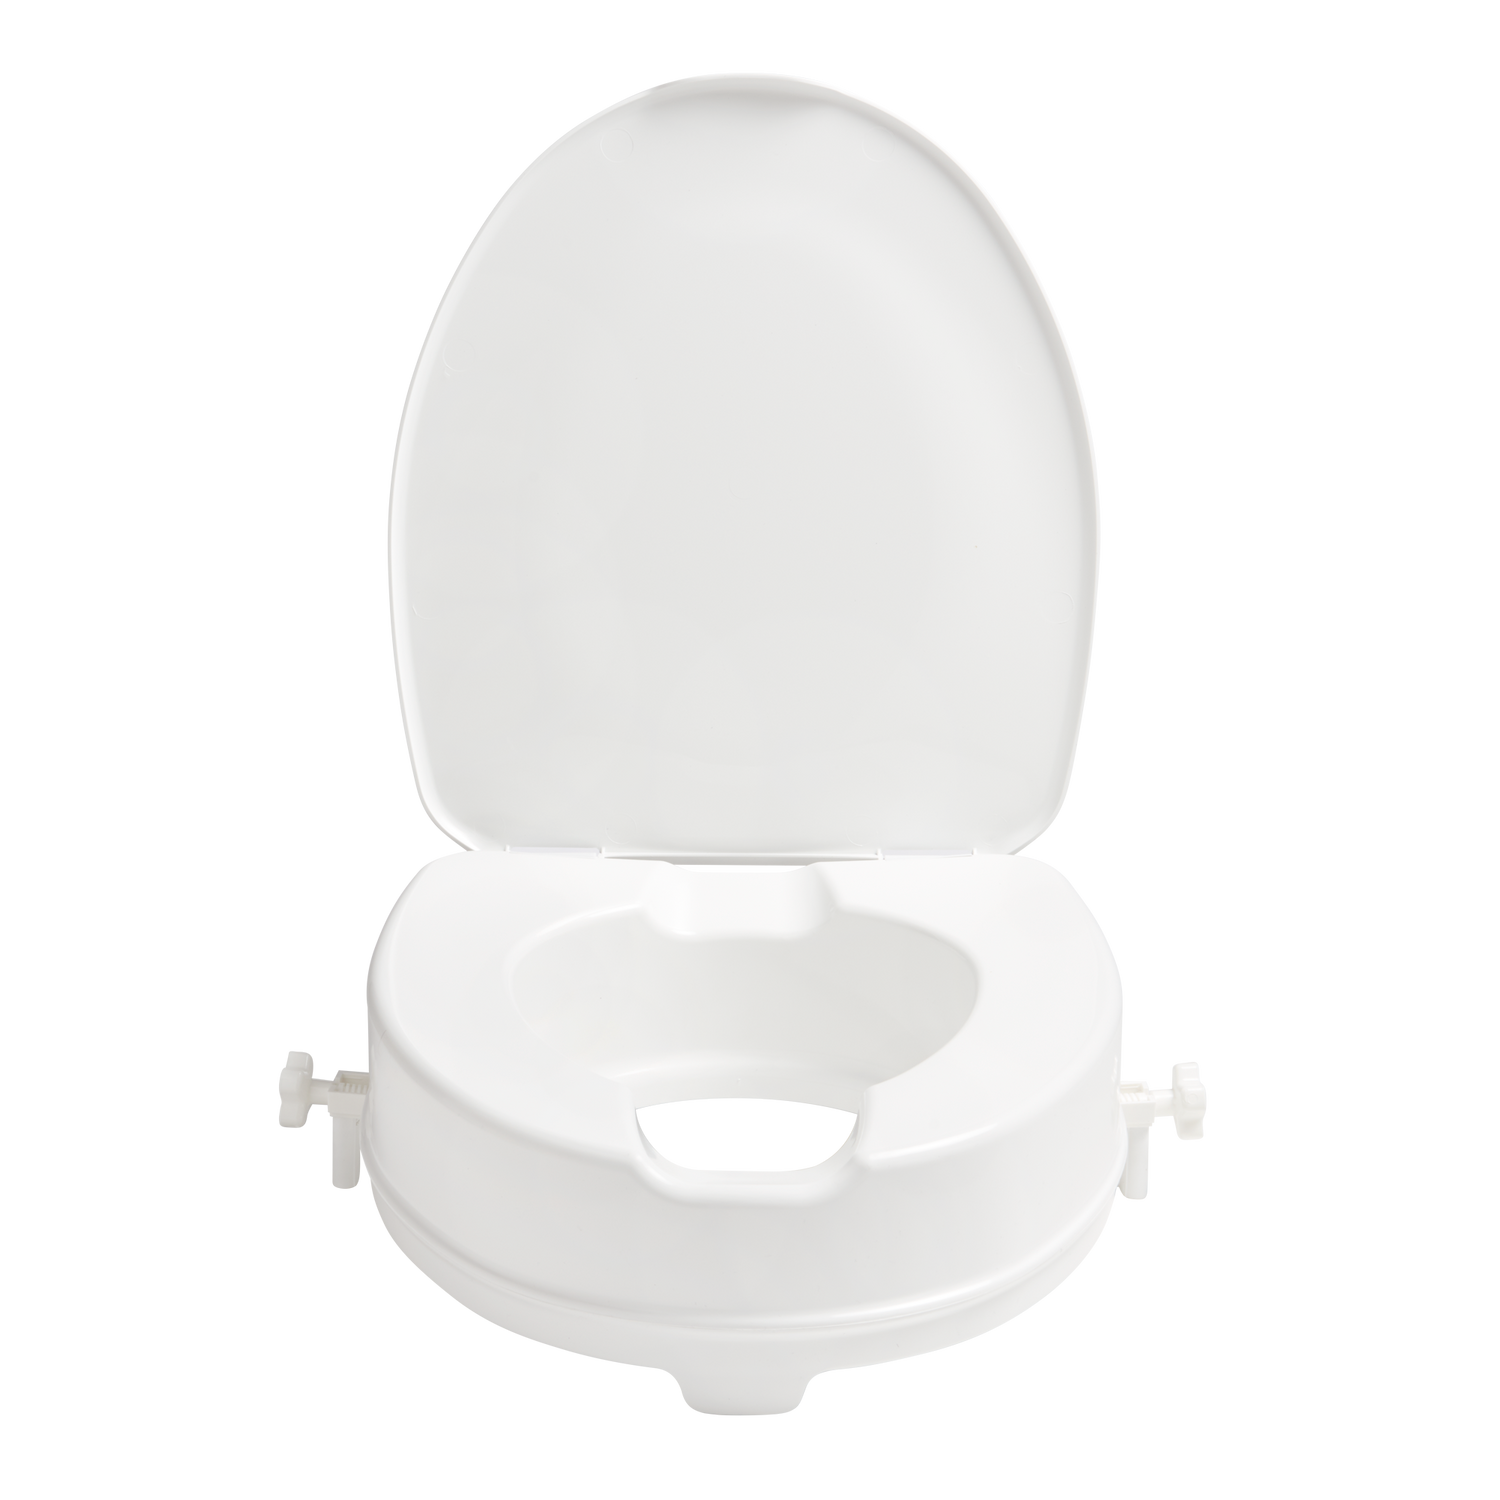 SecuCare Toilet seat raiser with lid